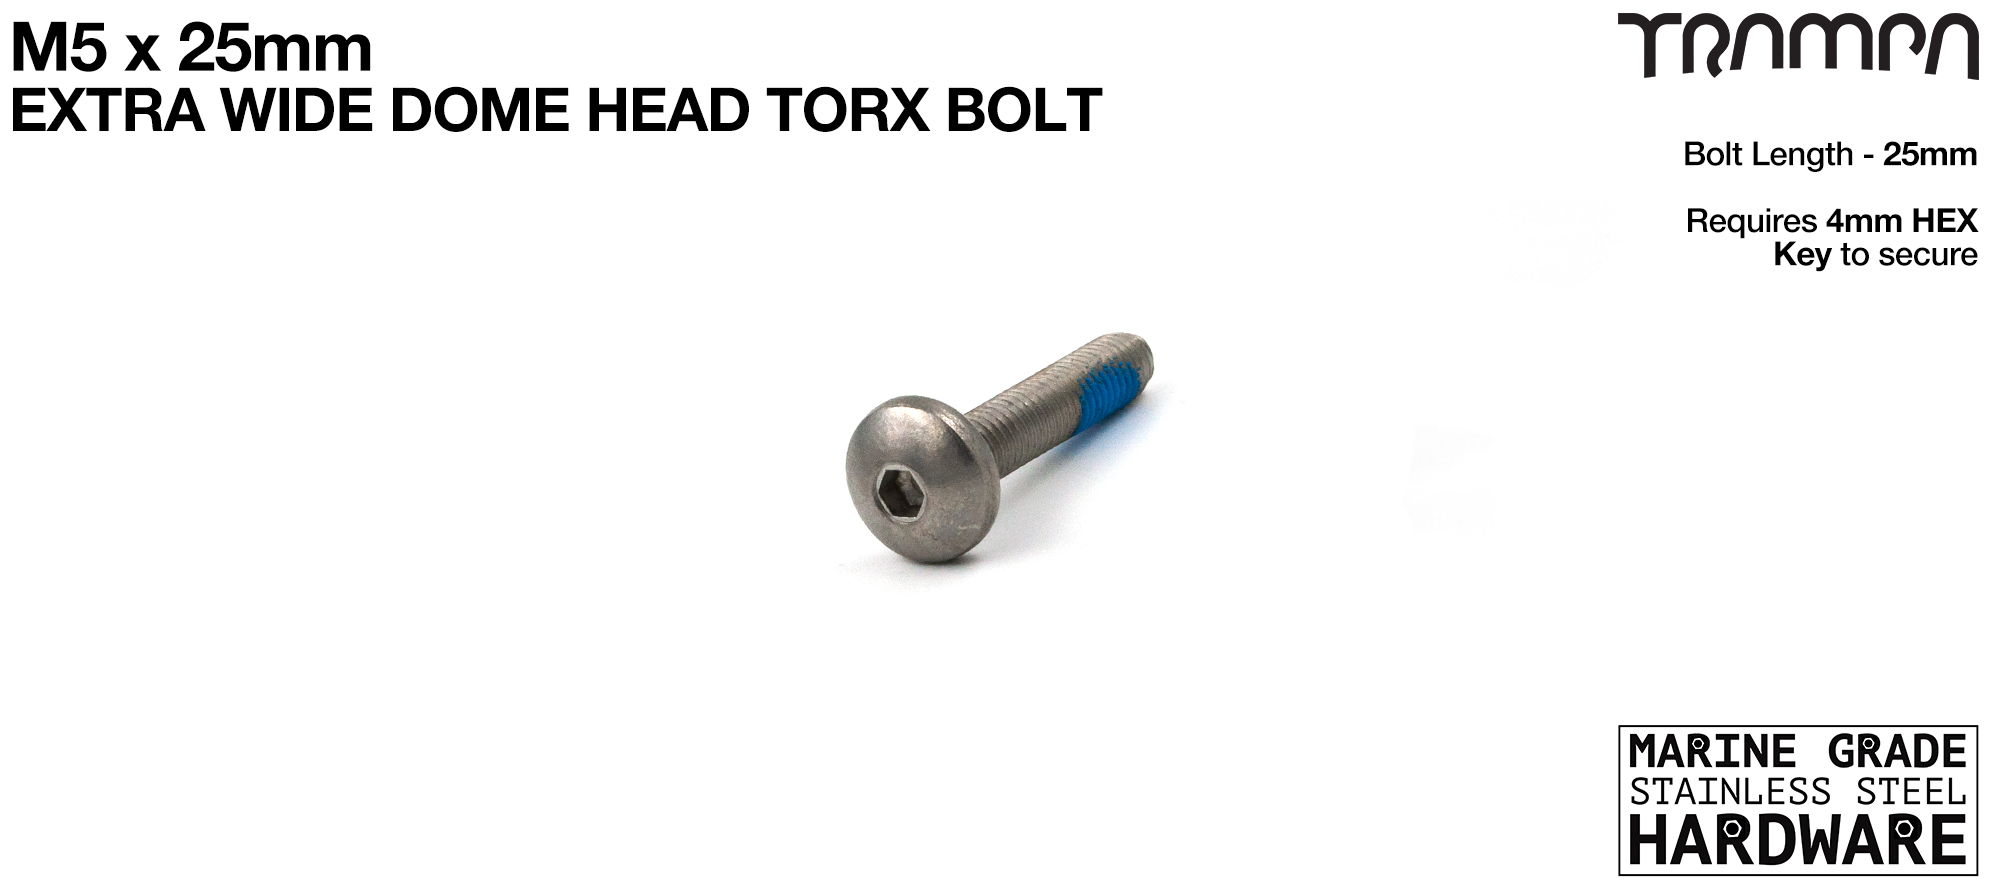 M5 x 25mm EXTRA WIDE Dome head Allen-Key Bolt - Marine Grade Stainless steel with locking paste used for fixing Heel Straps to Bindings